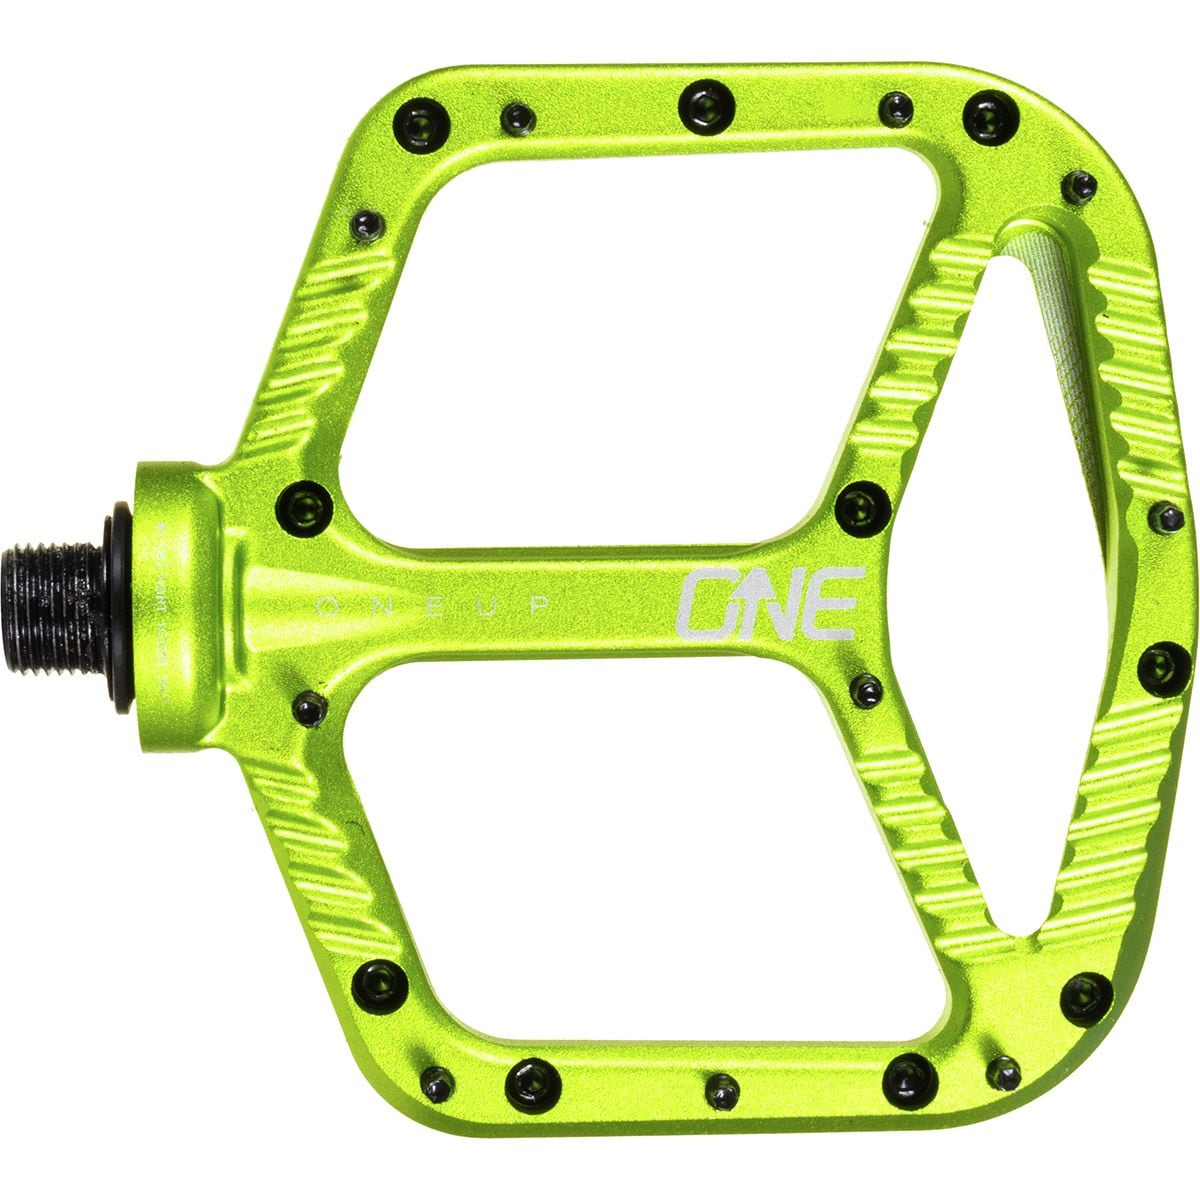 OneUp Components Aluminum Pedal Green, One Size